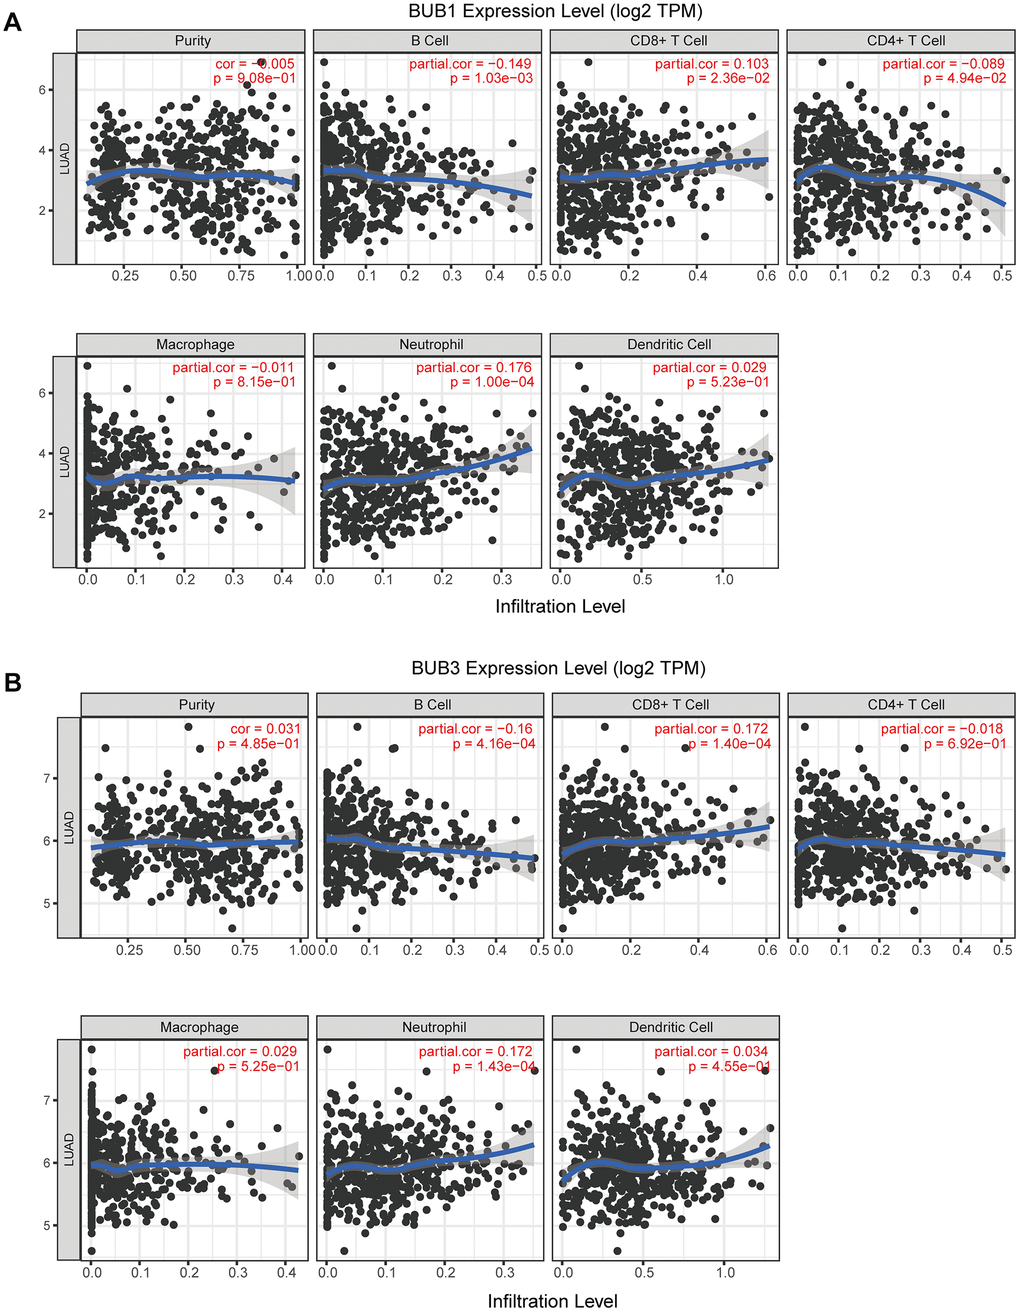 Correlation analysis of BUB1/3 and extent of immune cell infiltration. (A, B) Correlation analysis for BUB1 (A) and BUB3 (B), taking into account tumor purity, B cells, CD8+ T cells, CD4+ T cells, macrophages, neutrophils, and dendritic cells.